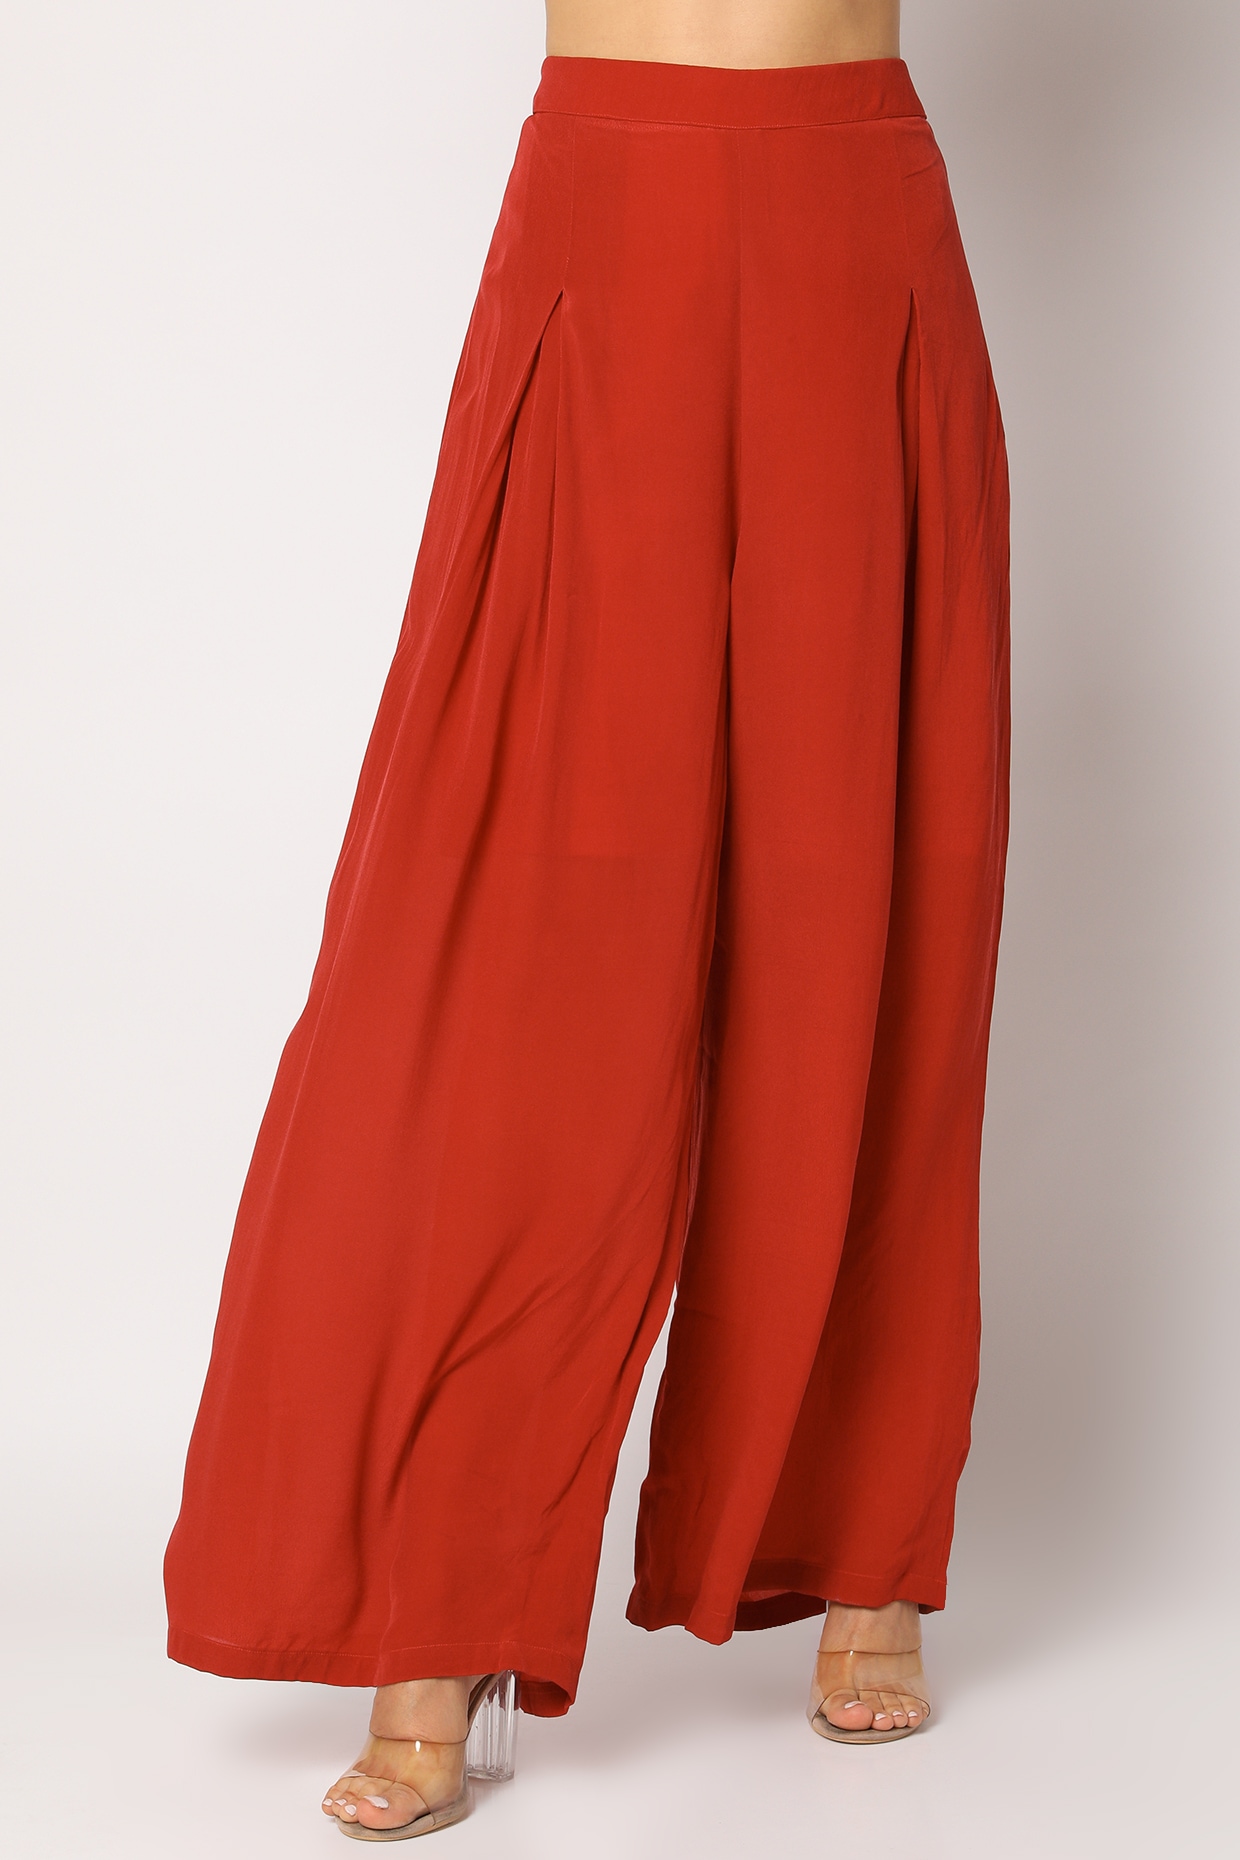 Red Crinkled Cropped Shirt With Wide Leg Pants | ADFY-SNCOORD-668 |  Cilory.com